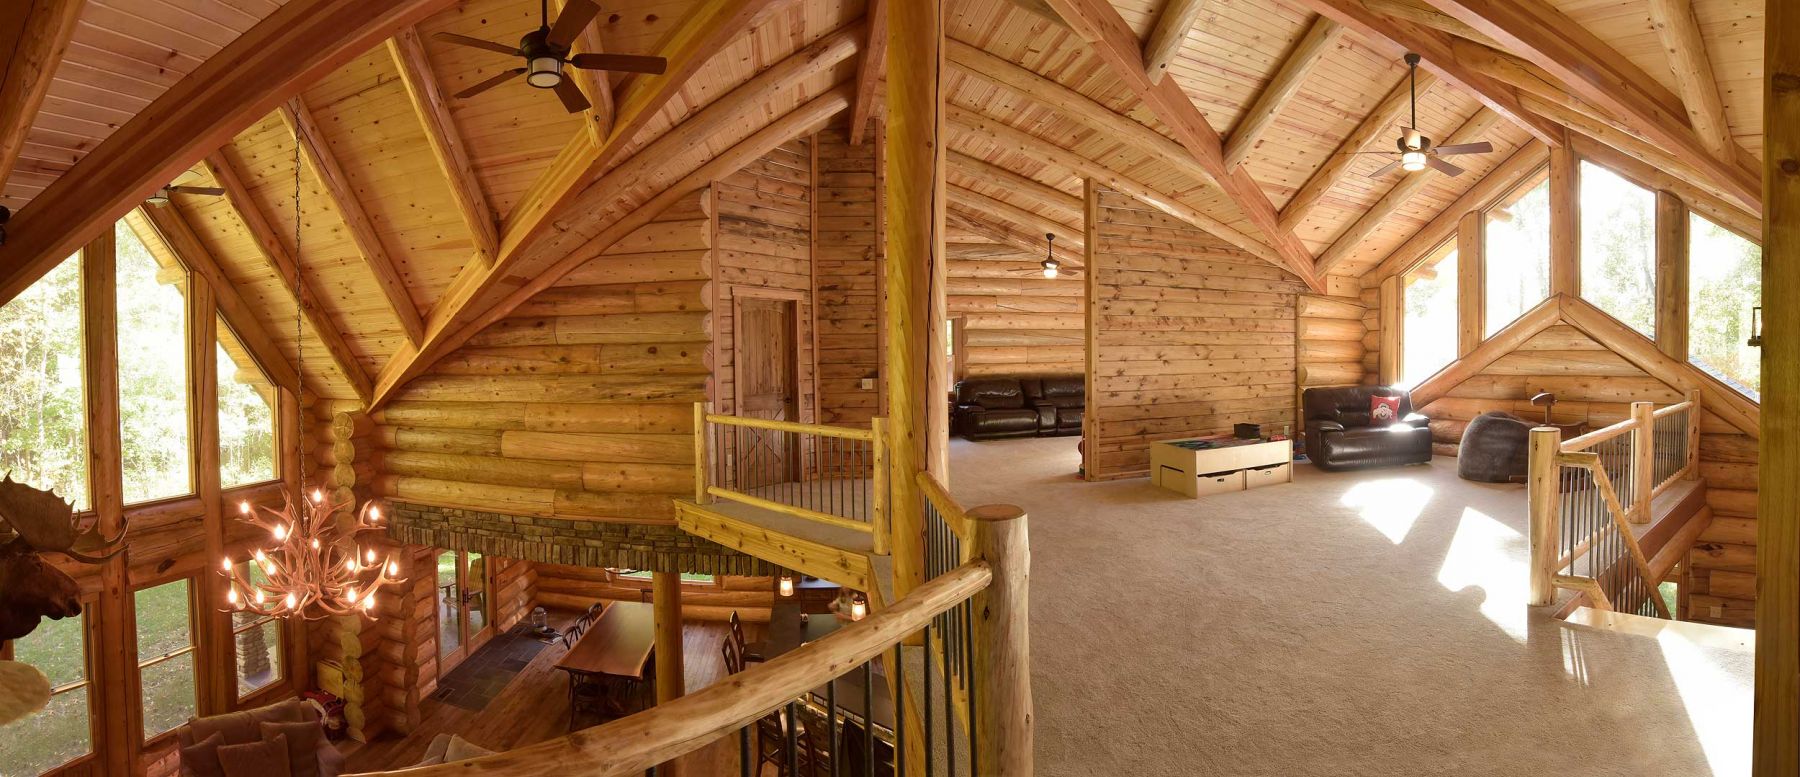 Full View of Loft Area in this Ohio built log home 